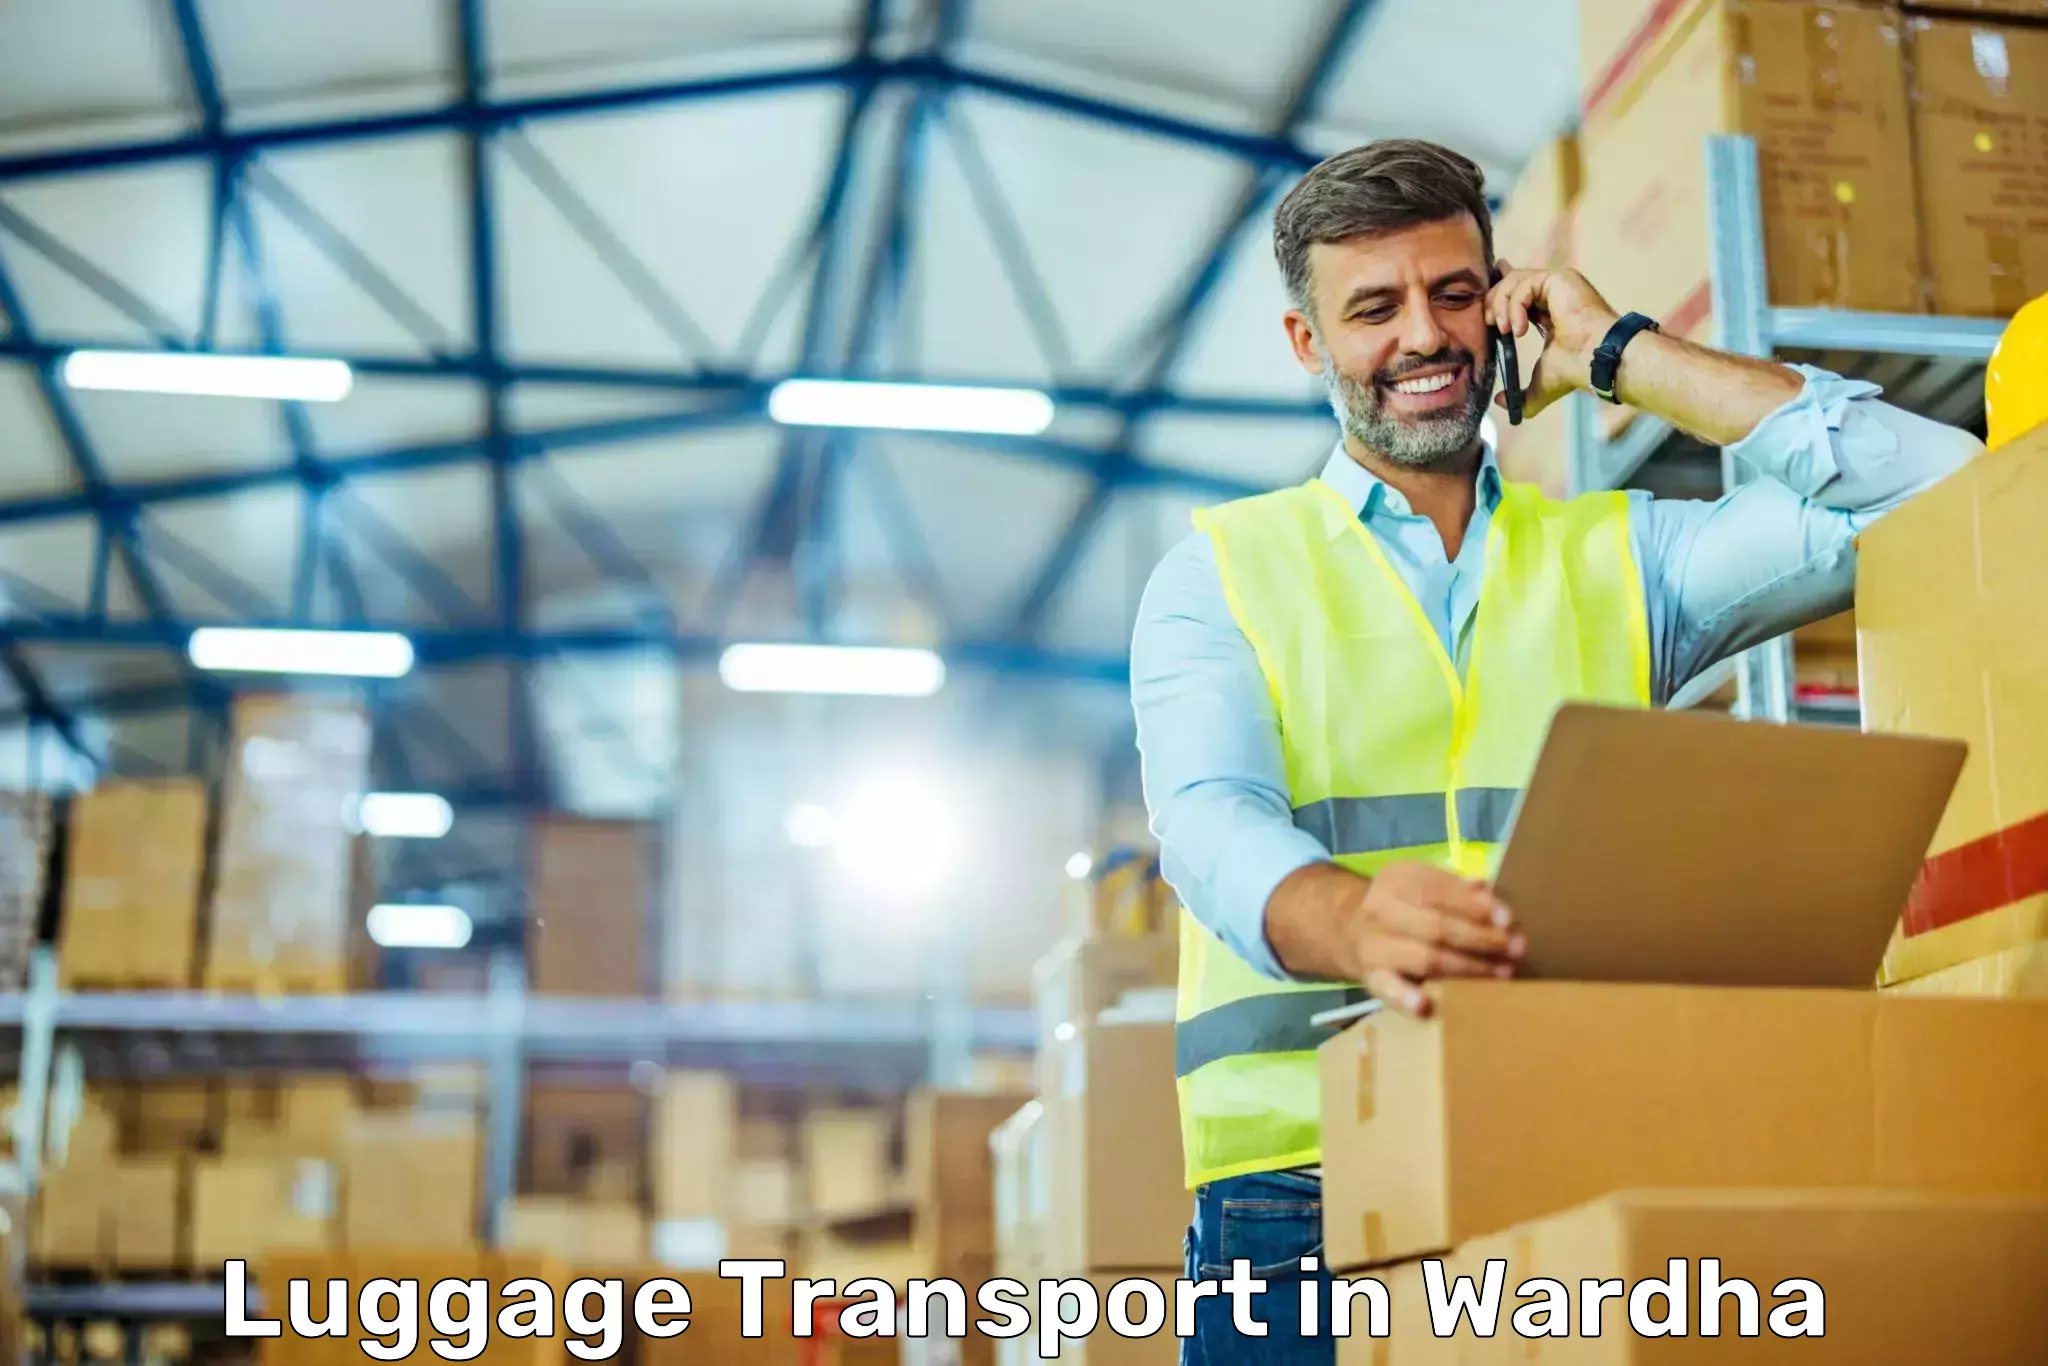 Baggage transport professionals in Wardha